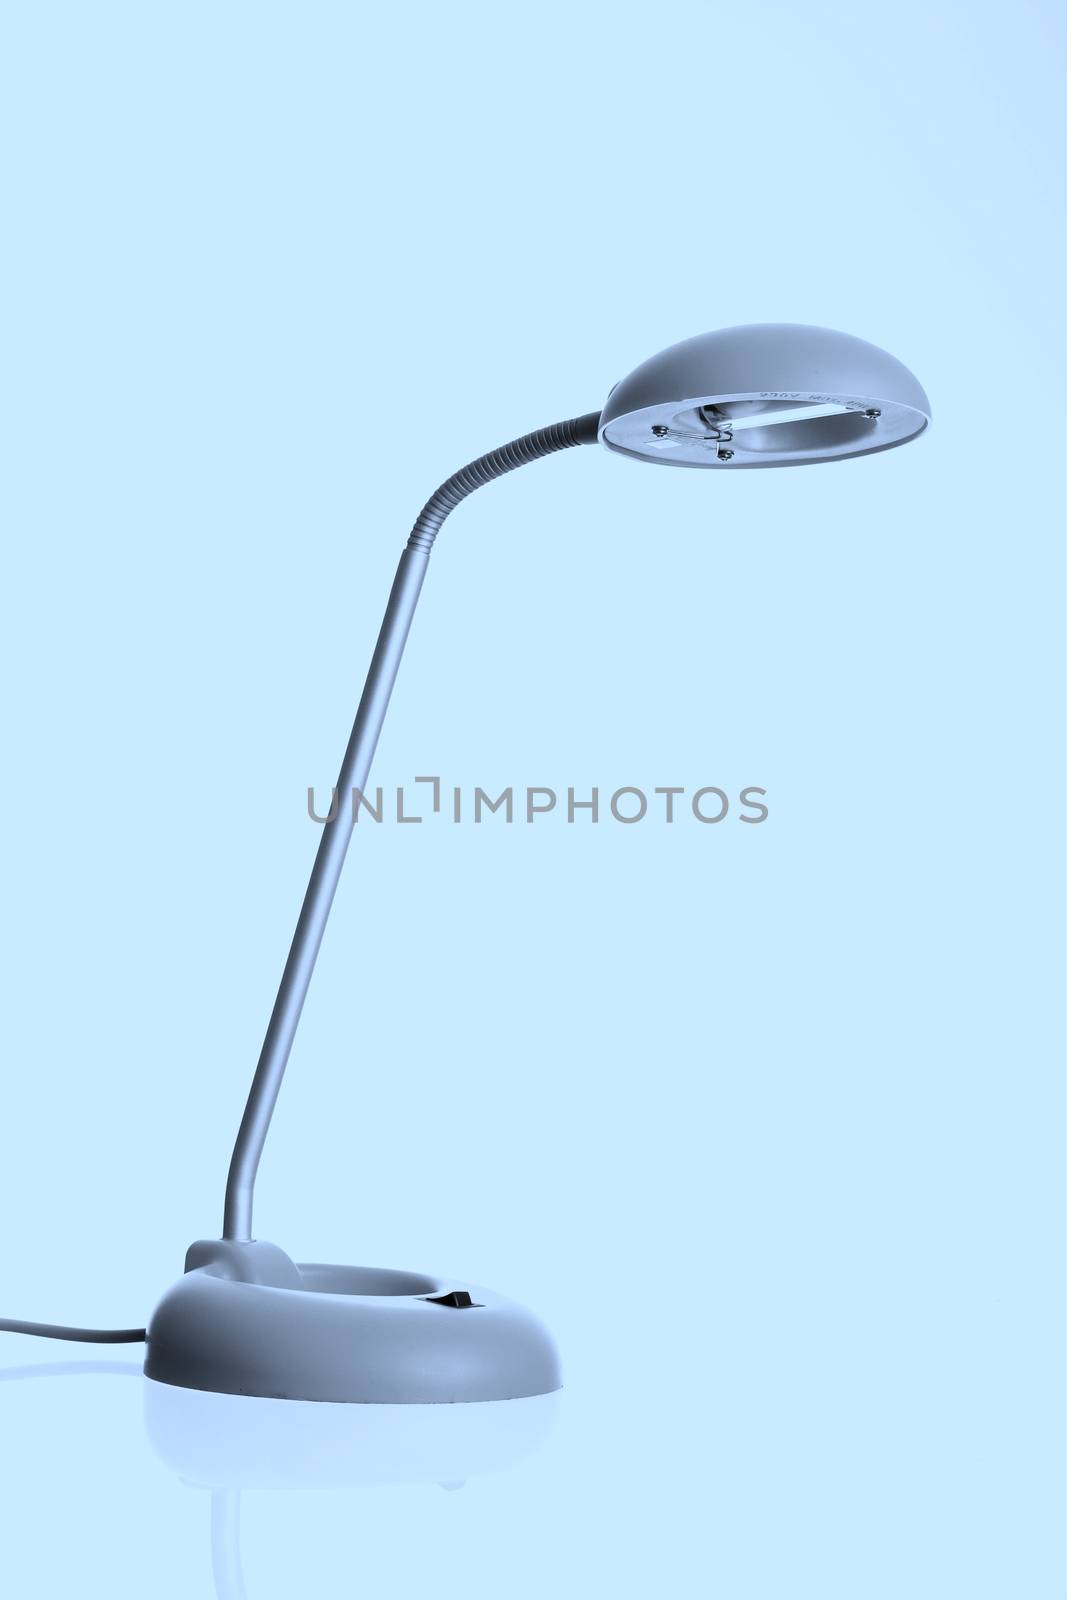 Closeup picture of a lamp.